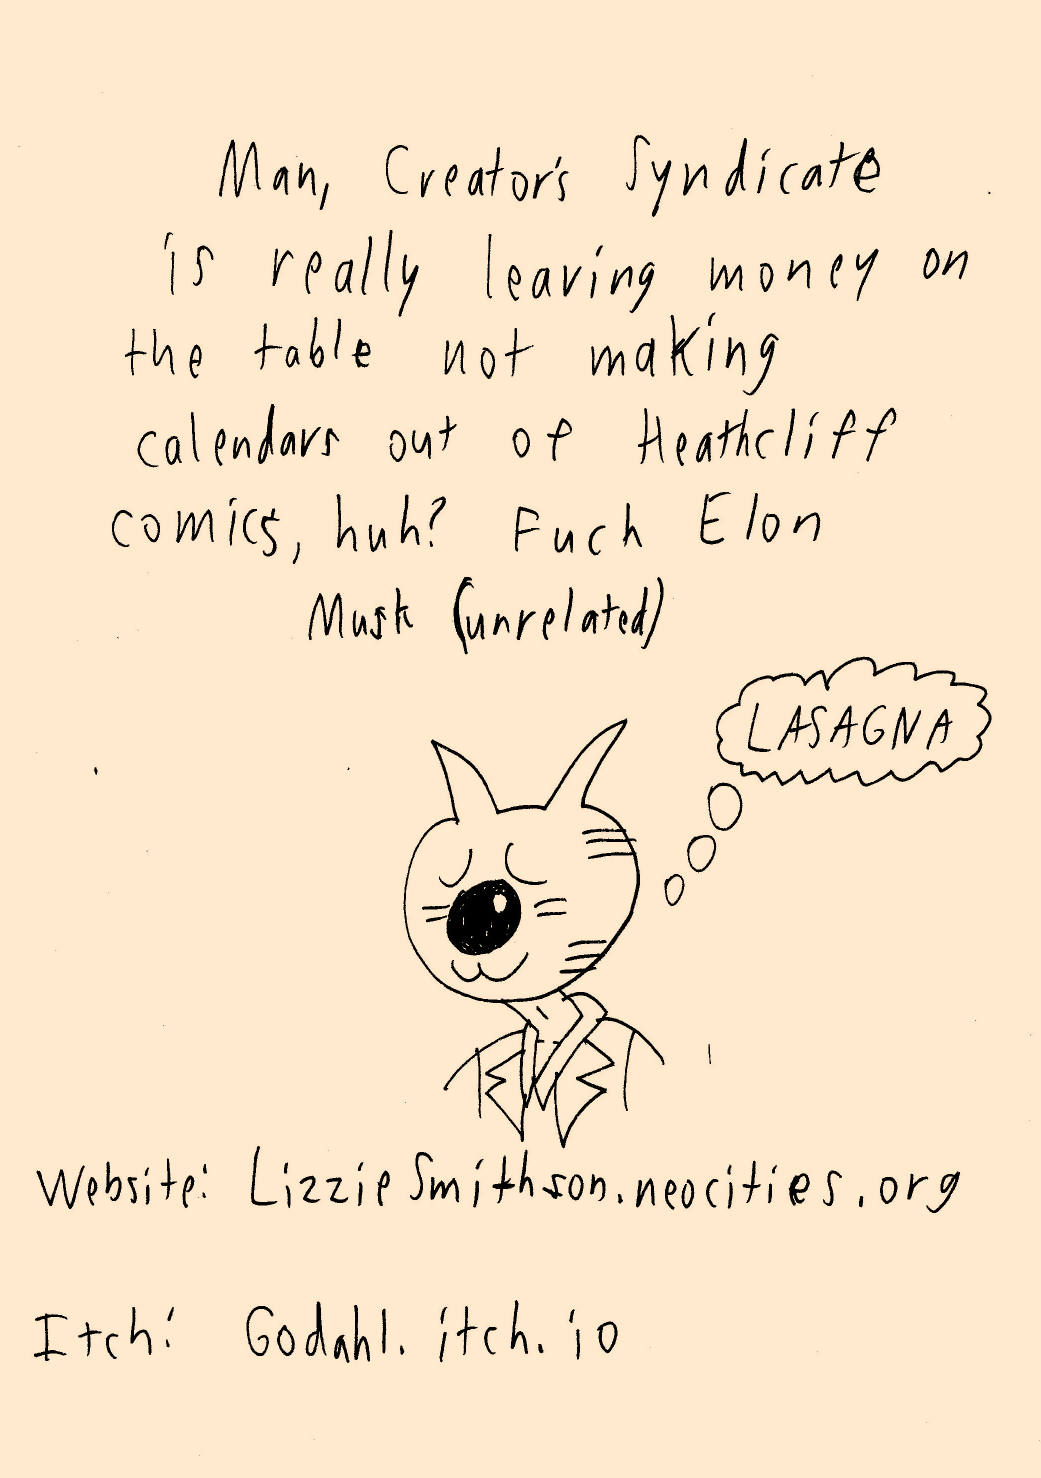 Narration text: Man, Creator's Syndicate is really leaving money on the table by not making calendars out of Heathcliff comics, huh? Fuck Elon Musk (unrelated). Heathcliff is in the corner thinking to himself: Lasagna.